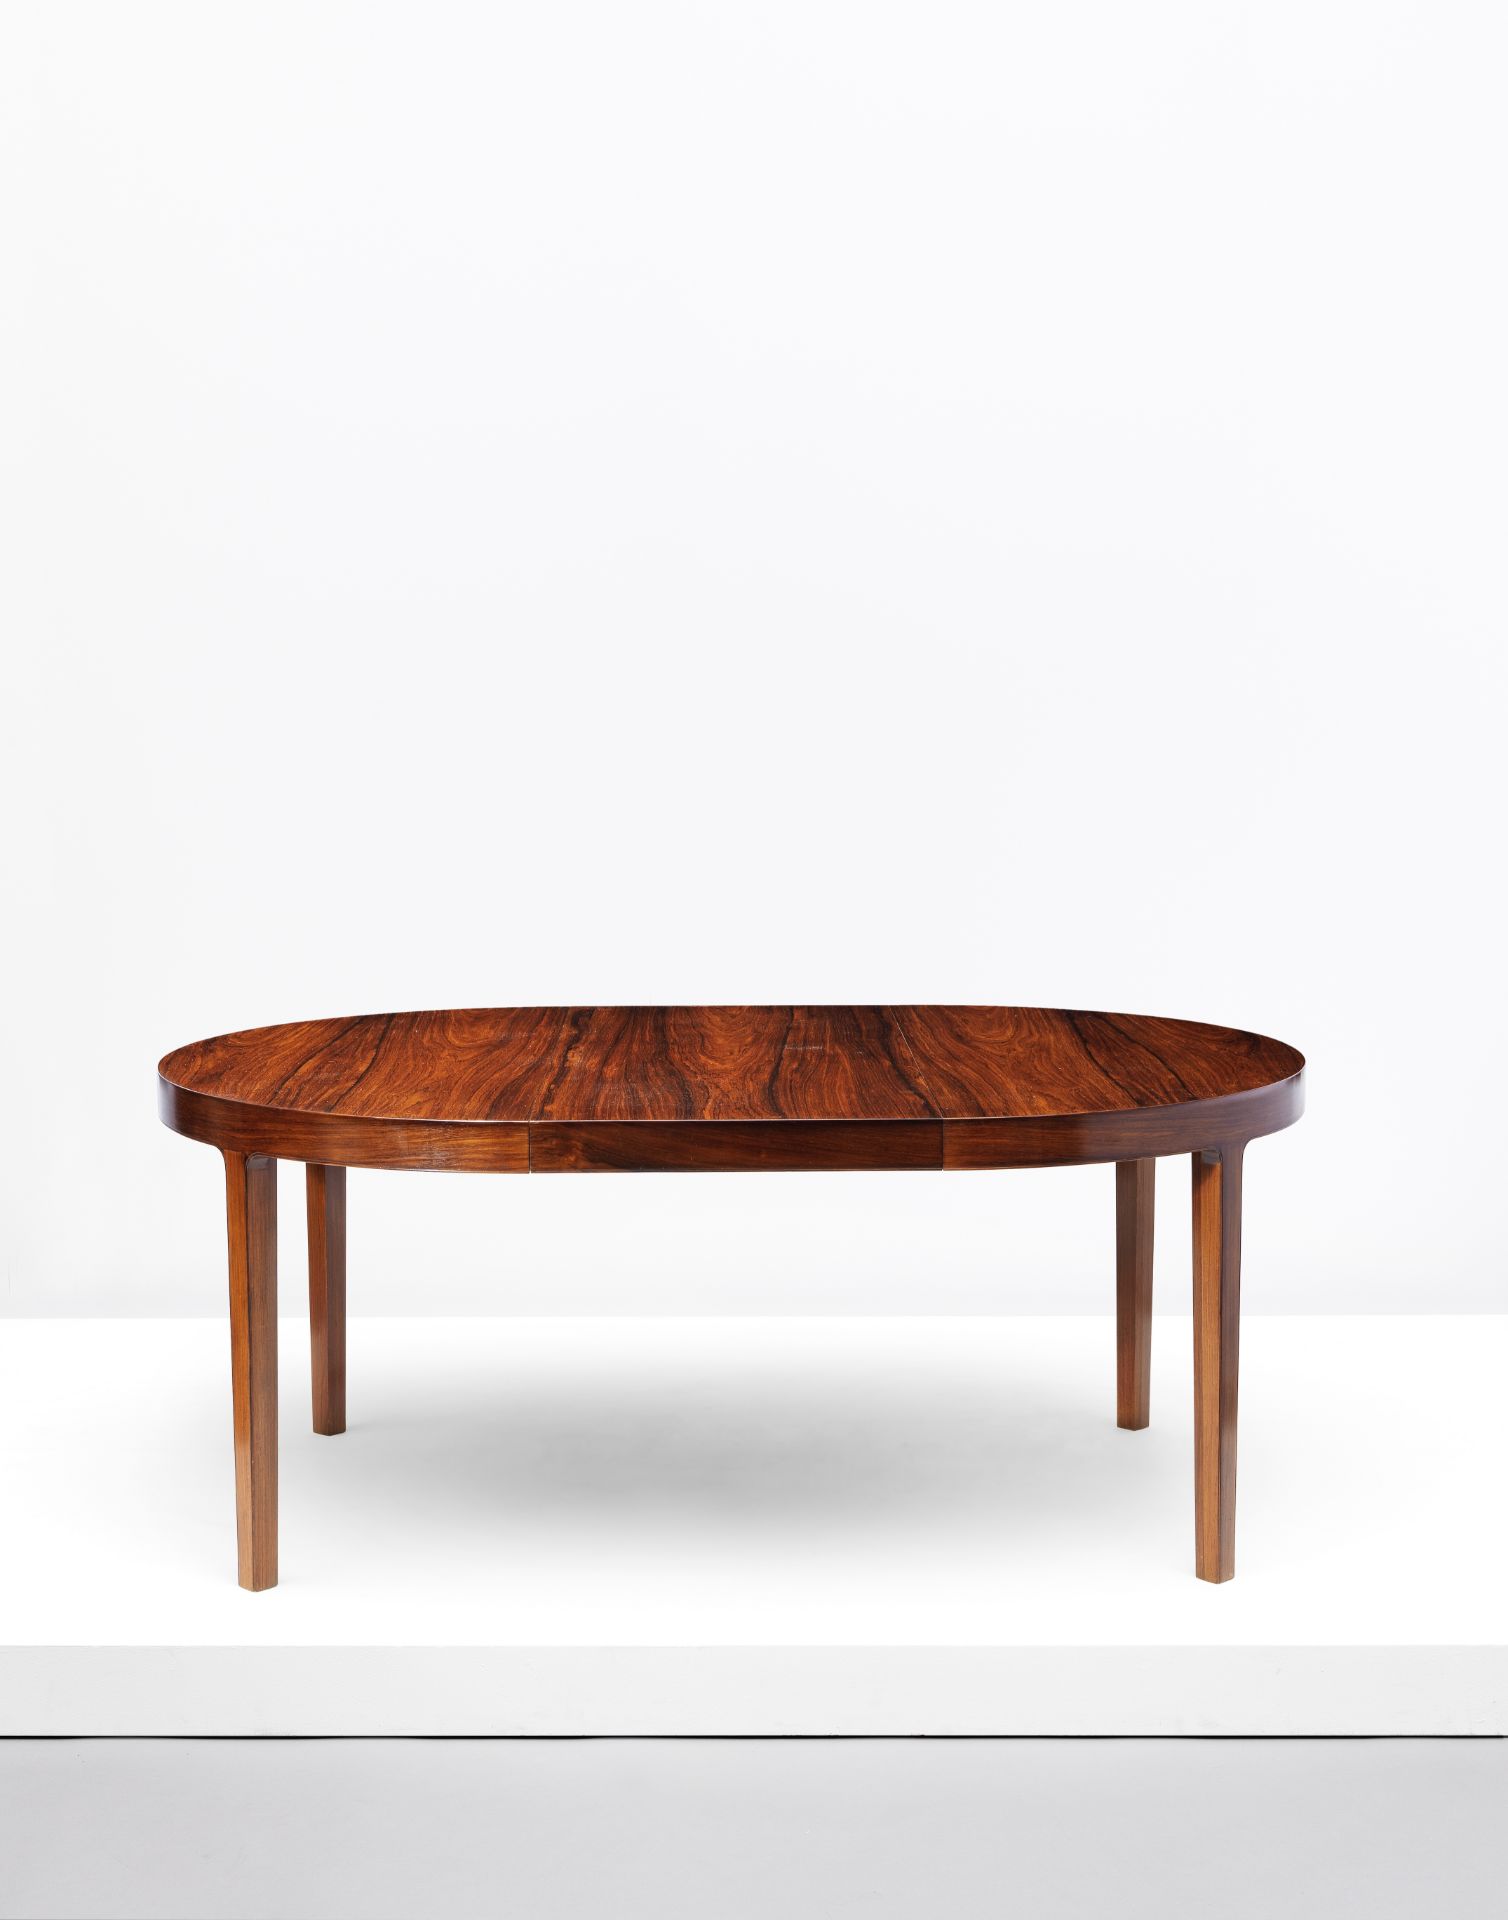 Ole Wanscher Extendable dining table, designed early 1940s